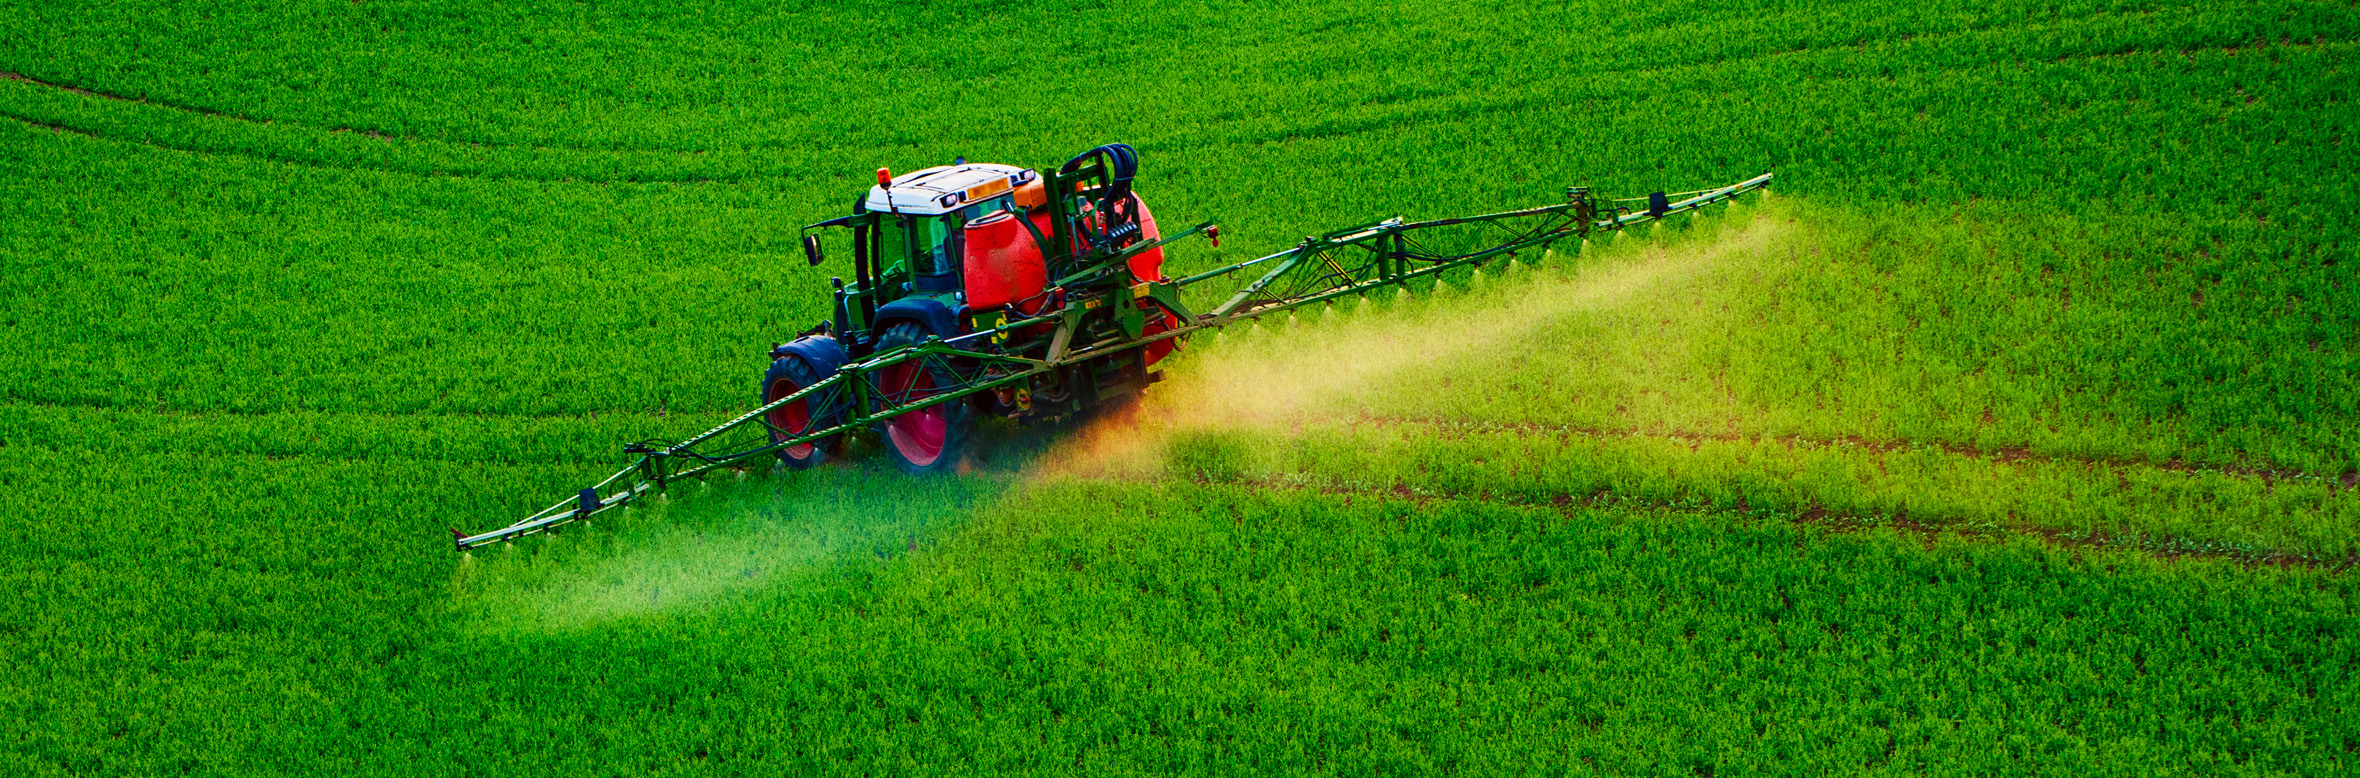 Tractor spraying insecticide over a green field